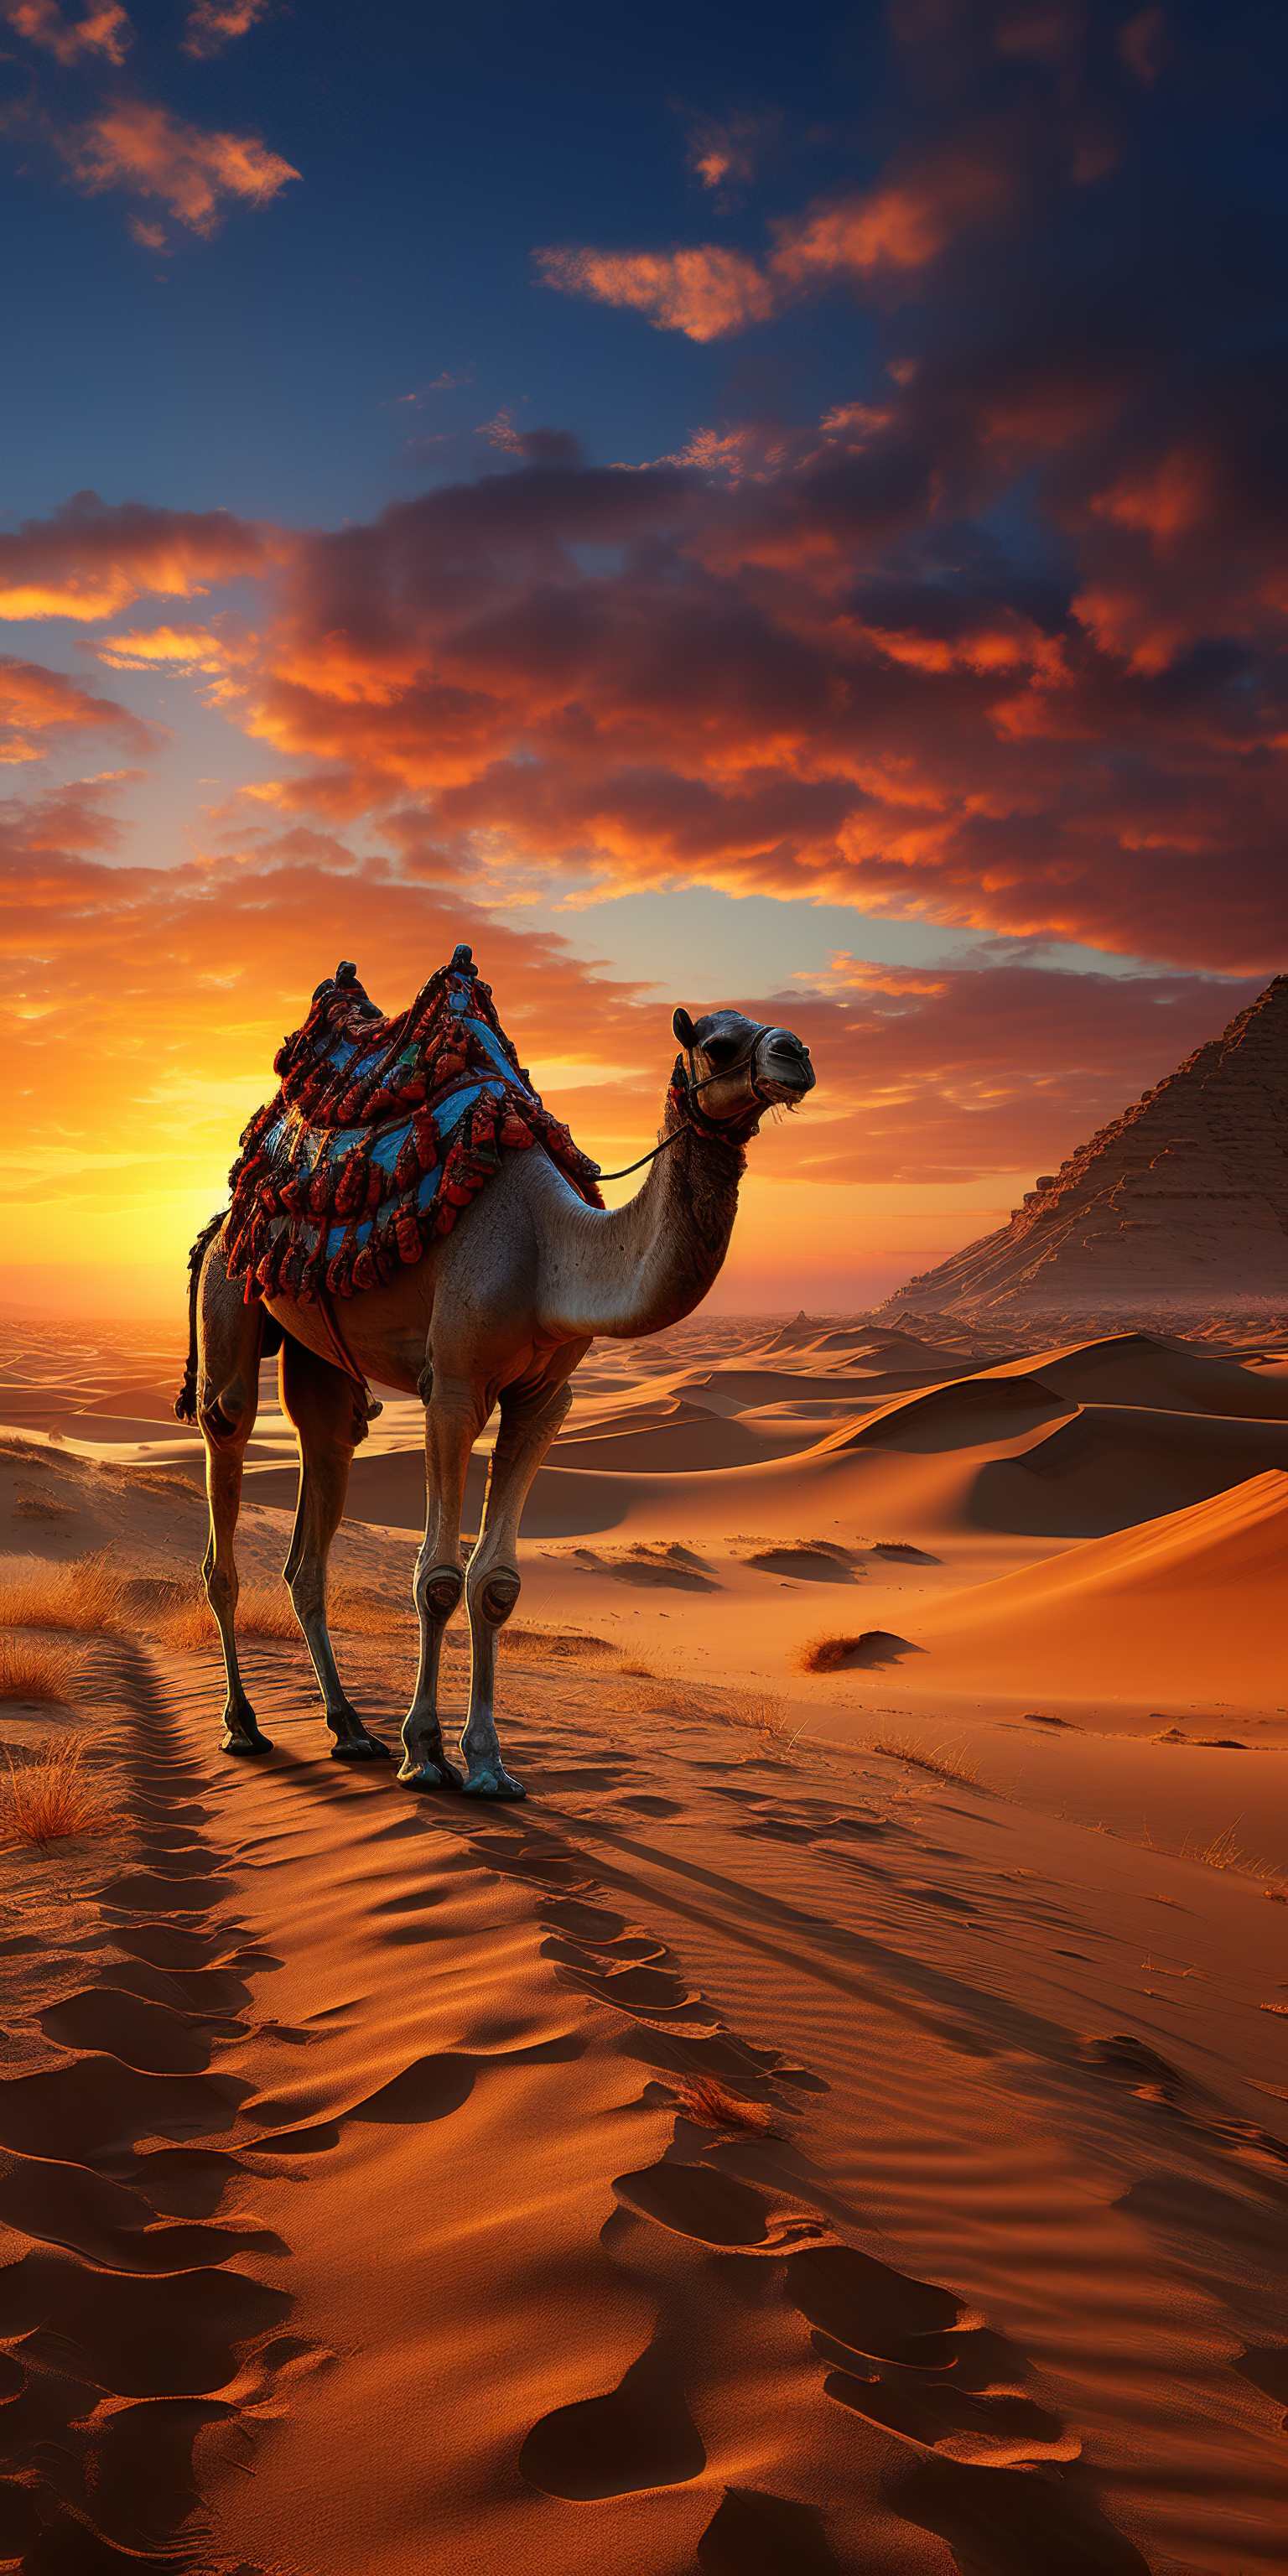 Impressive view of a camel with colorful intricate saddle back